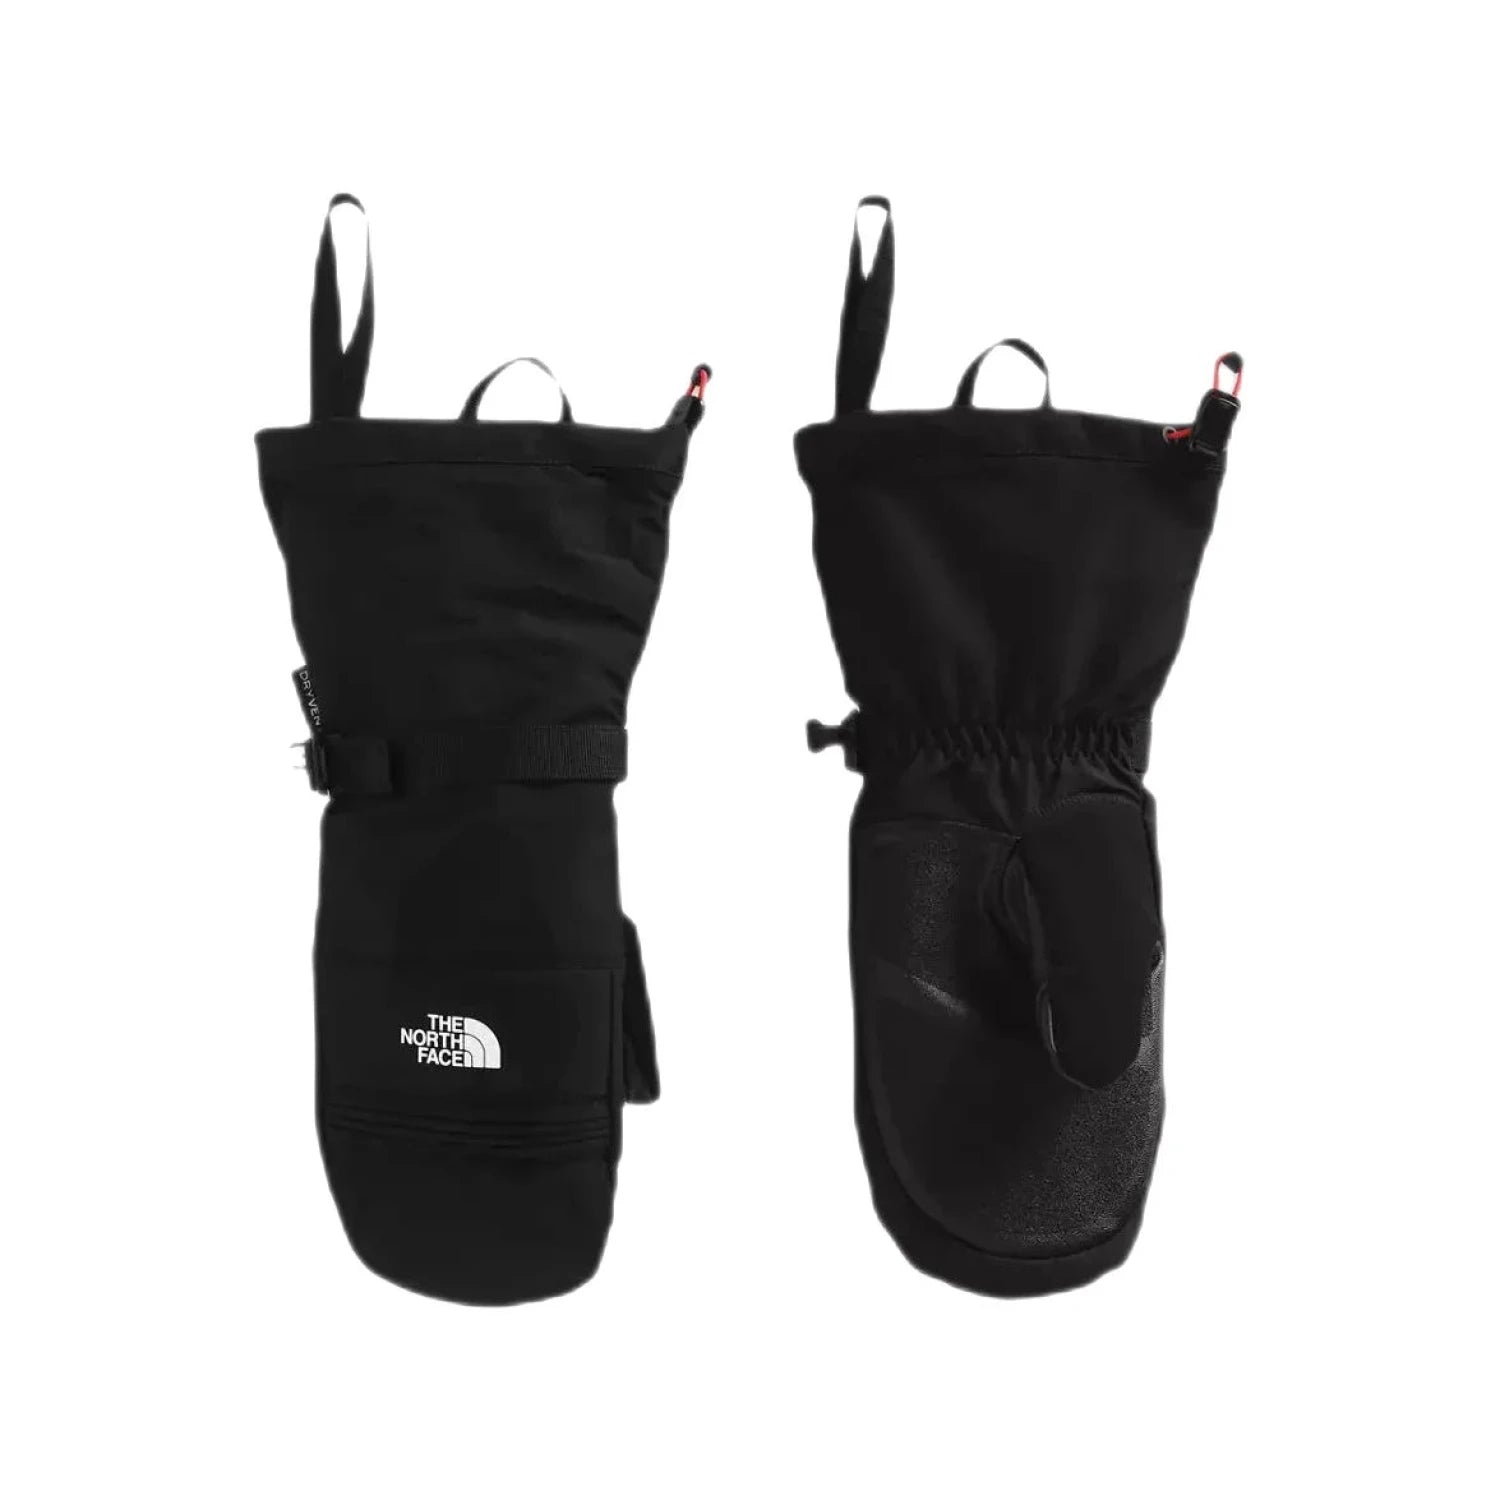 The North Face Men’s Montana Ski Mitts shown in the Black color option. Front and back view.